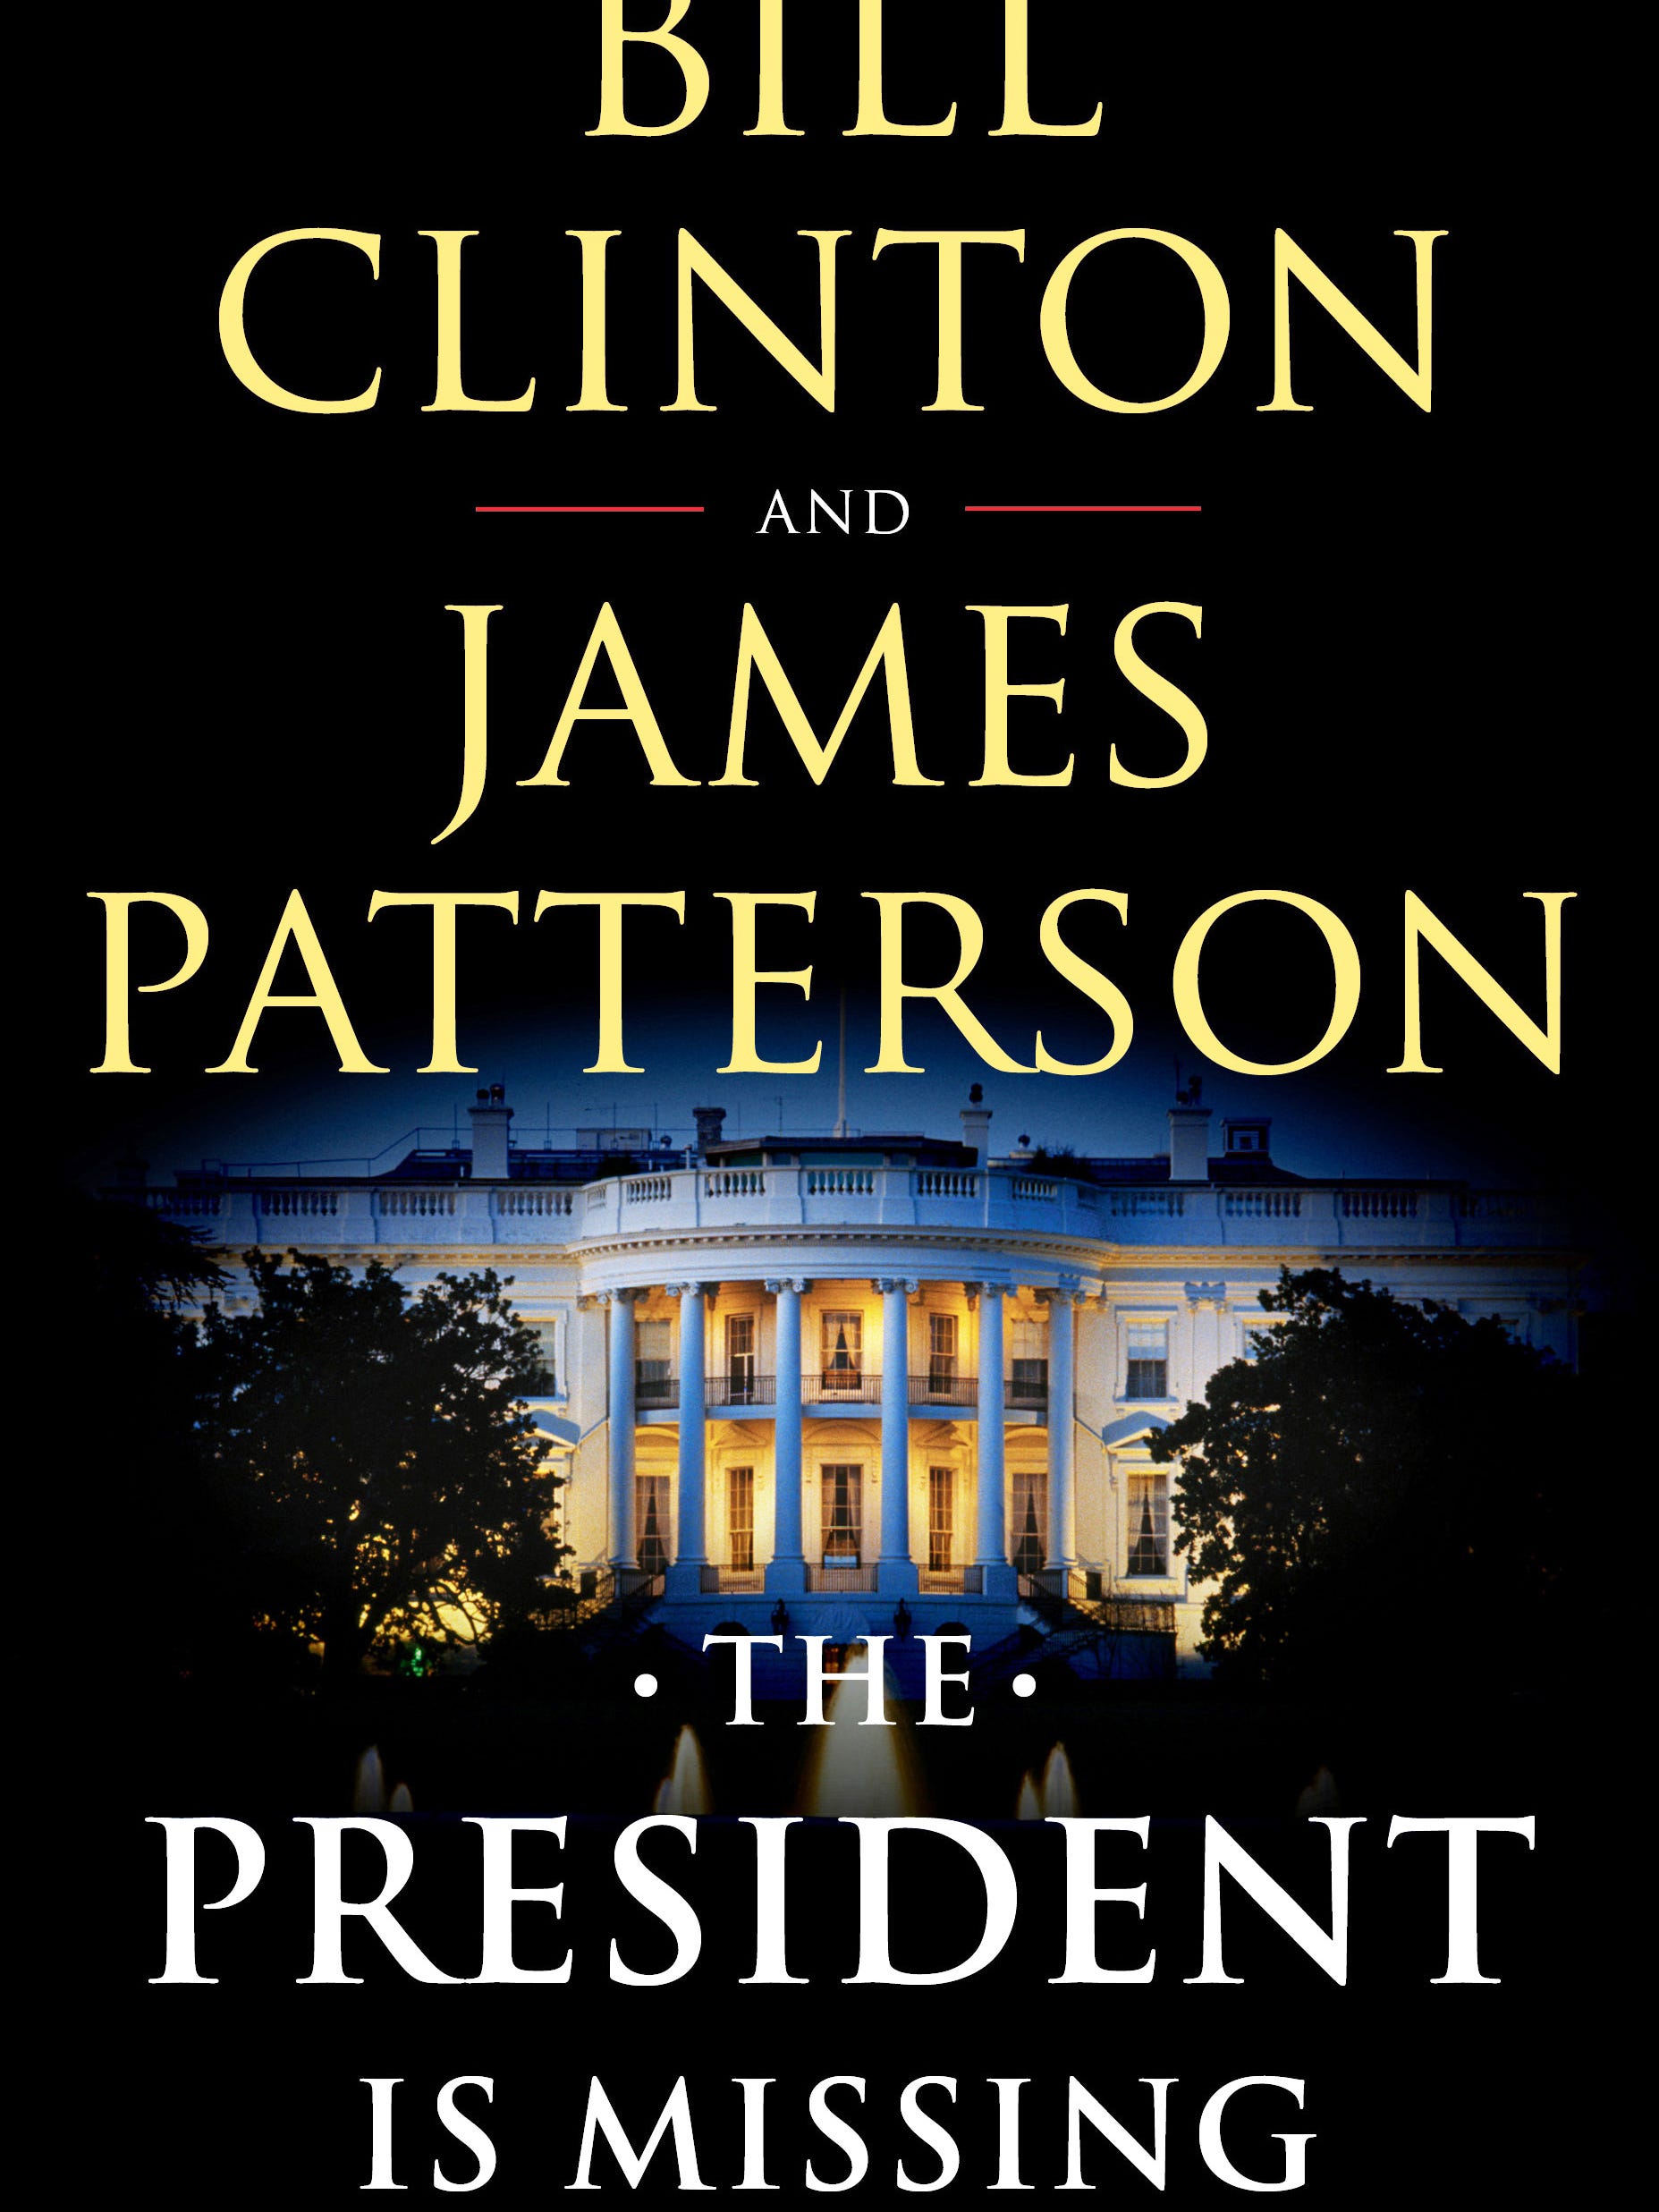 "The President Is Missing" by Bill Clinton and James Patterson